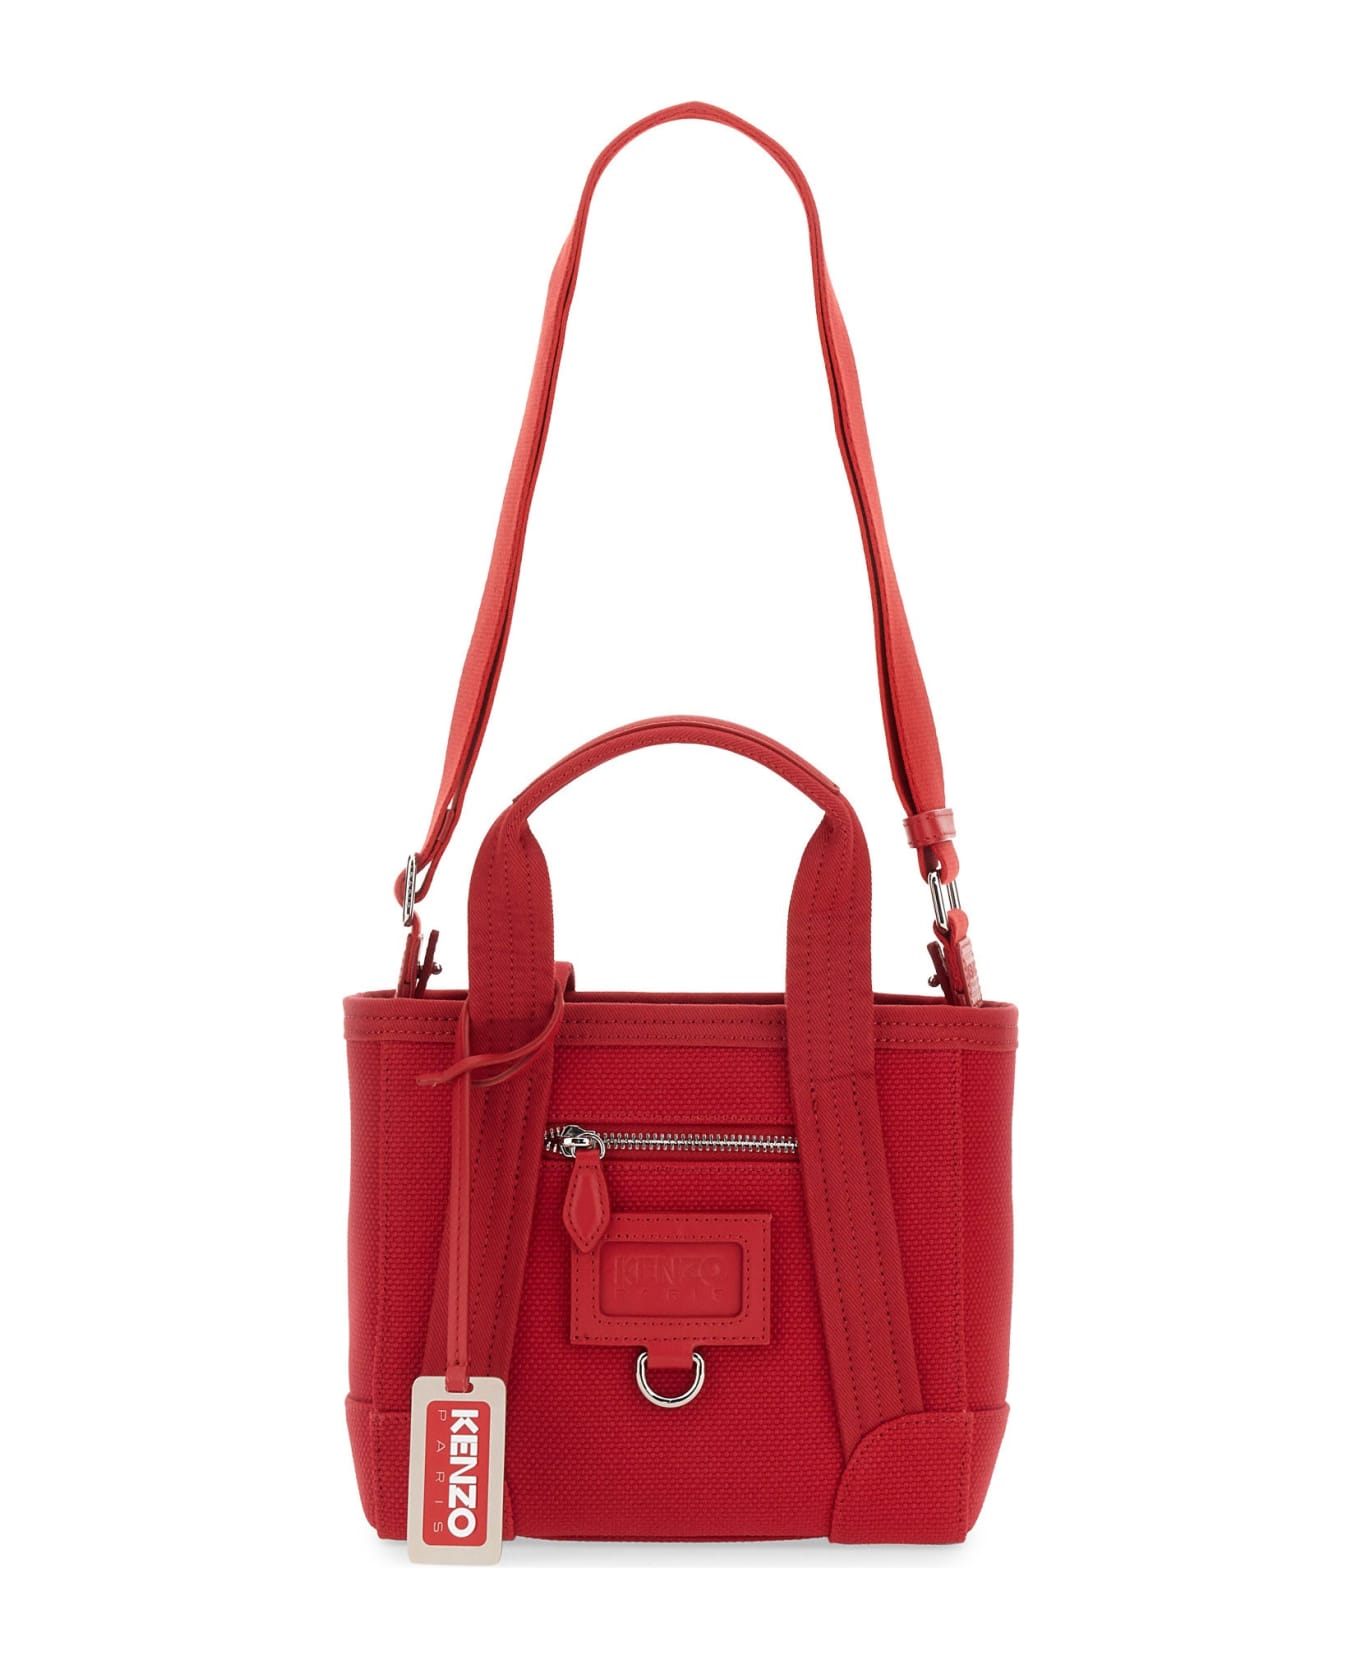 Kenzo Tote Bag - ROSSO